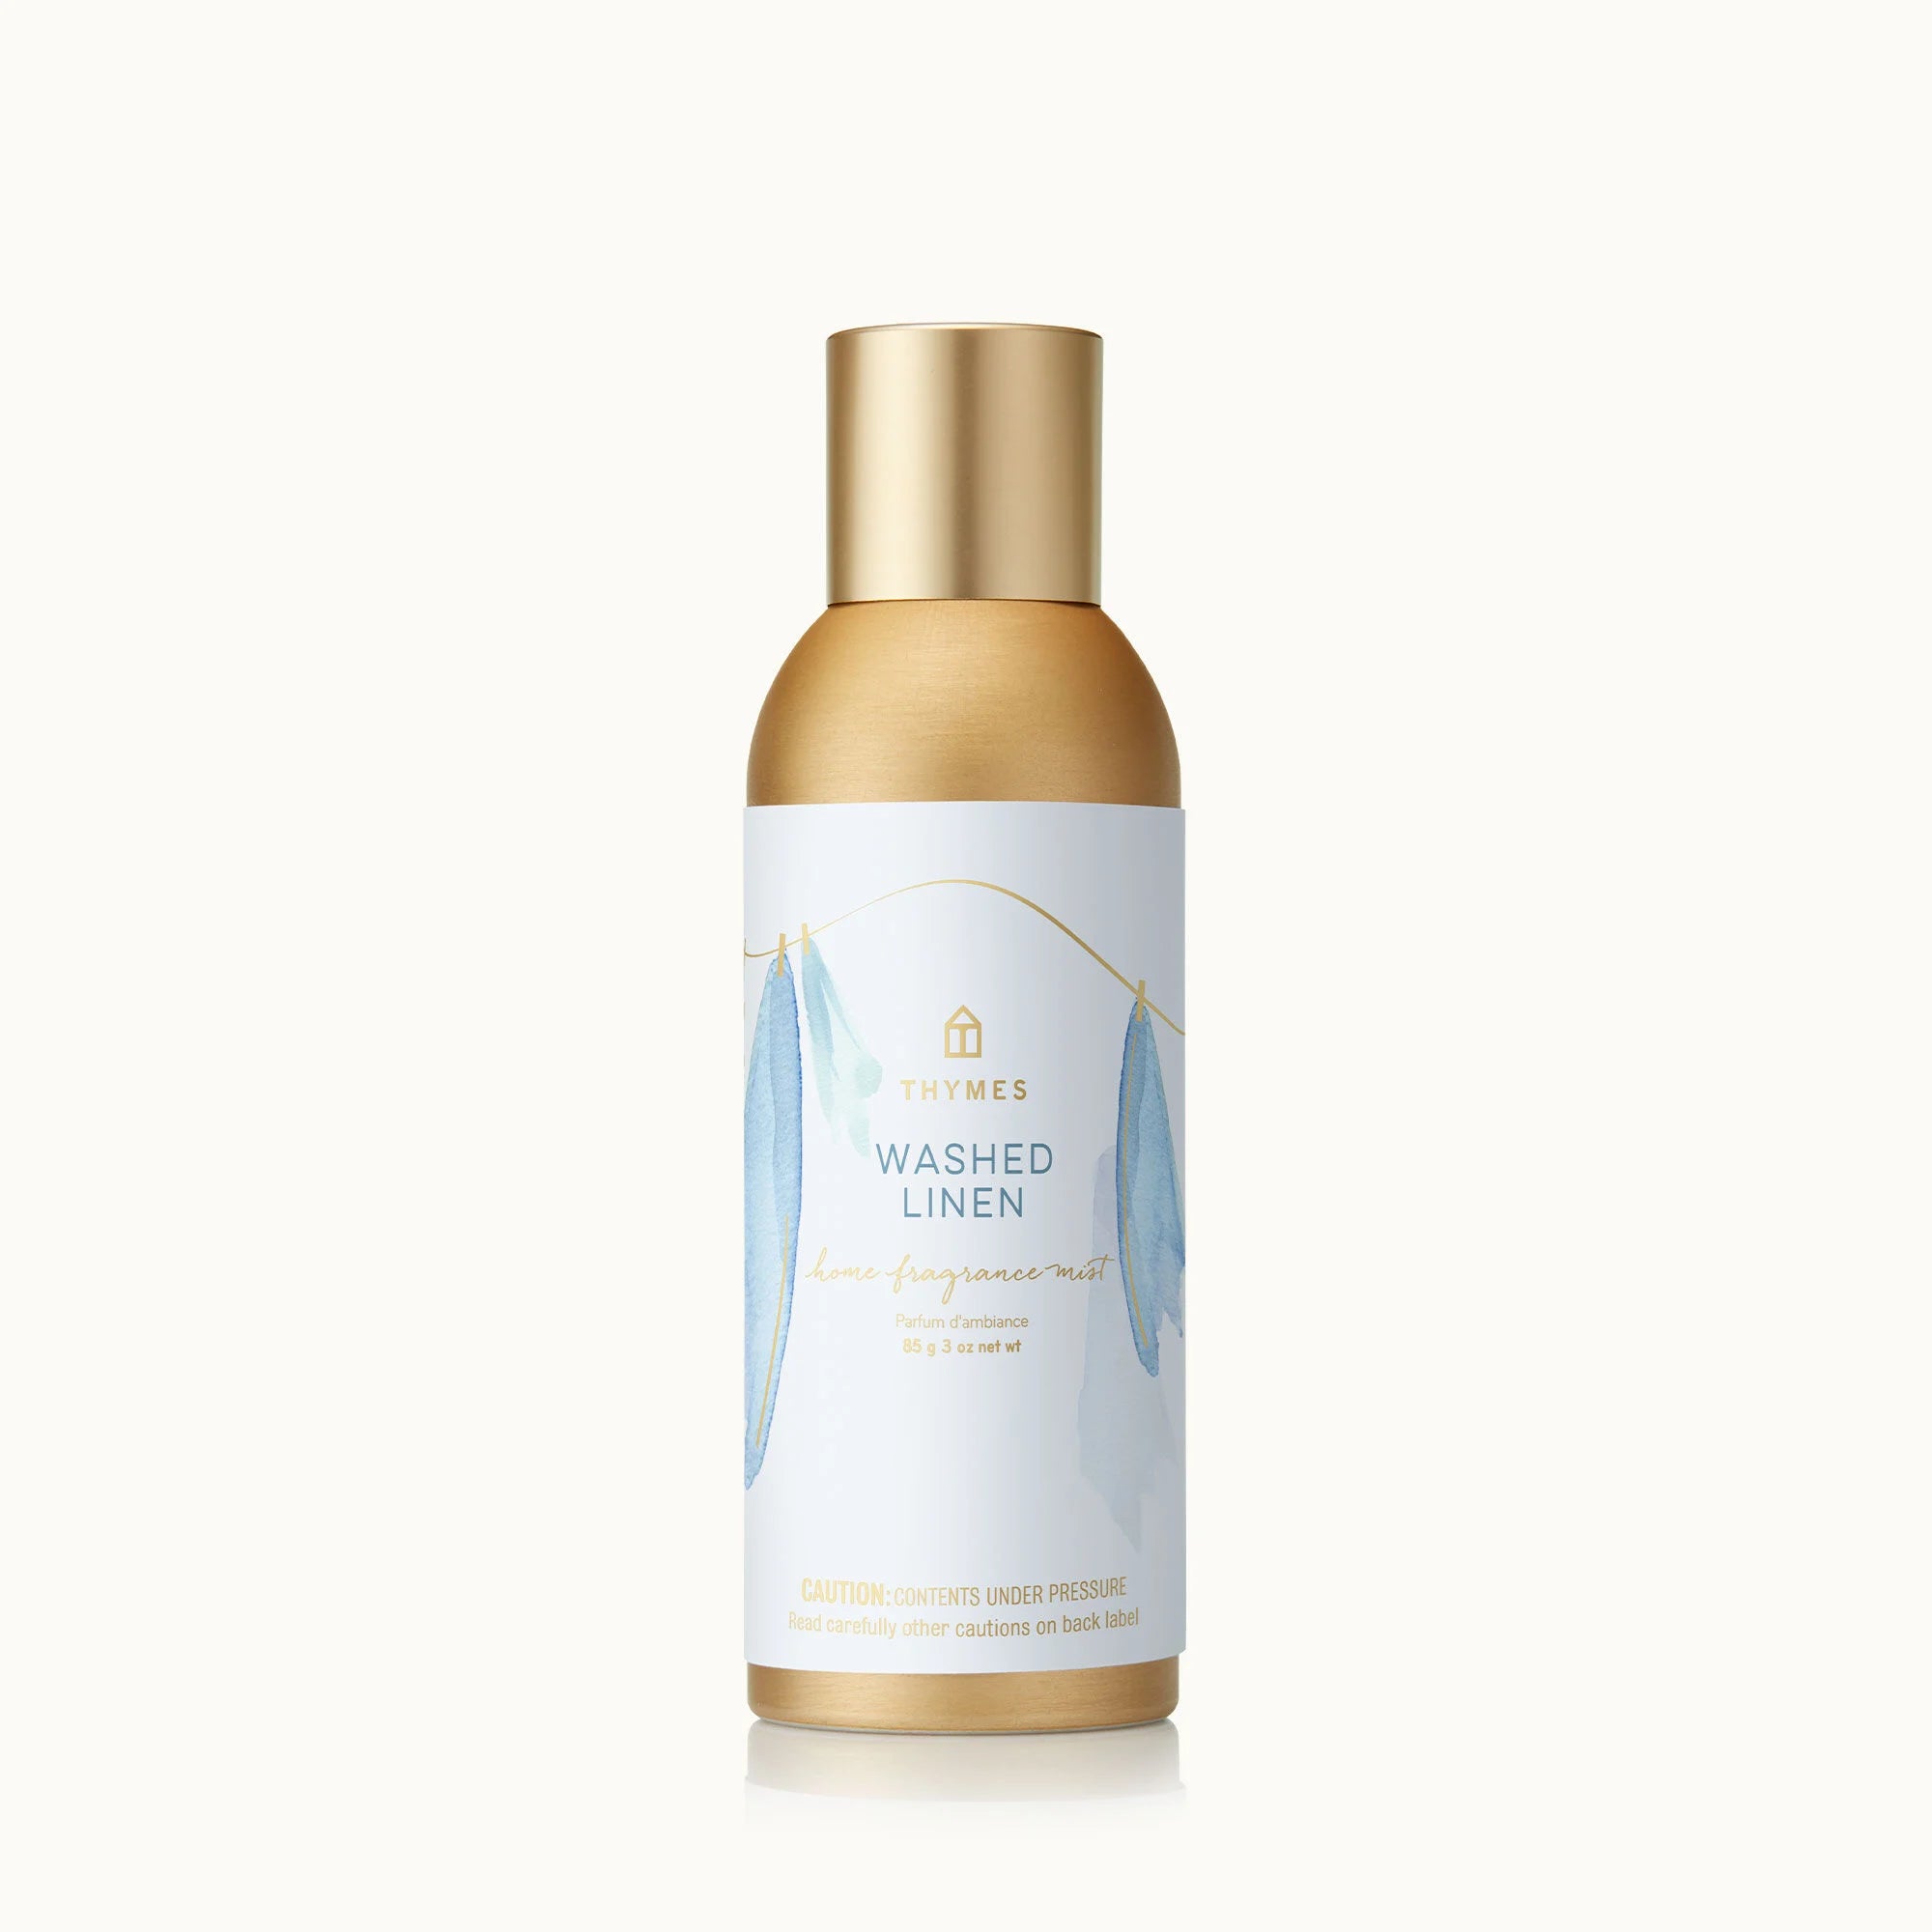 Washed Linen Home Fragrance Spray